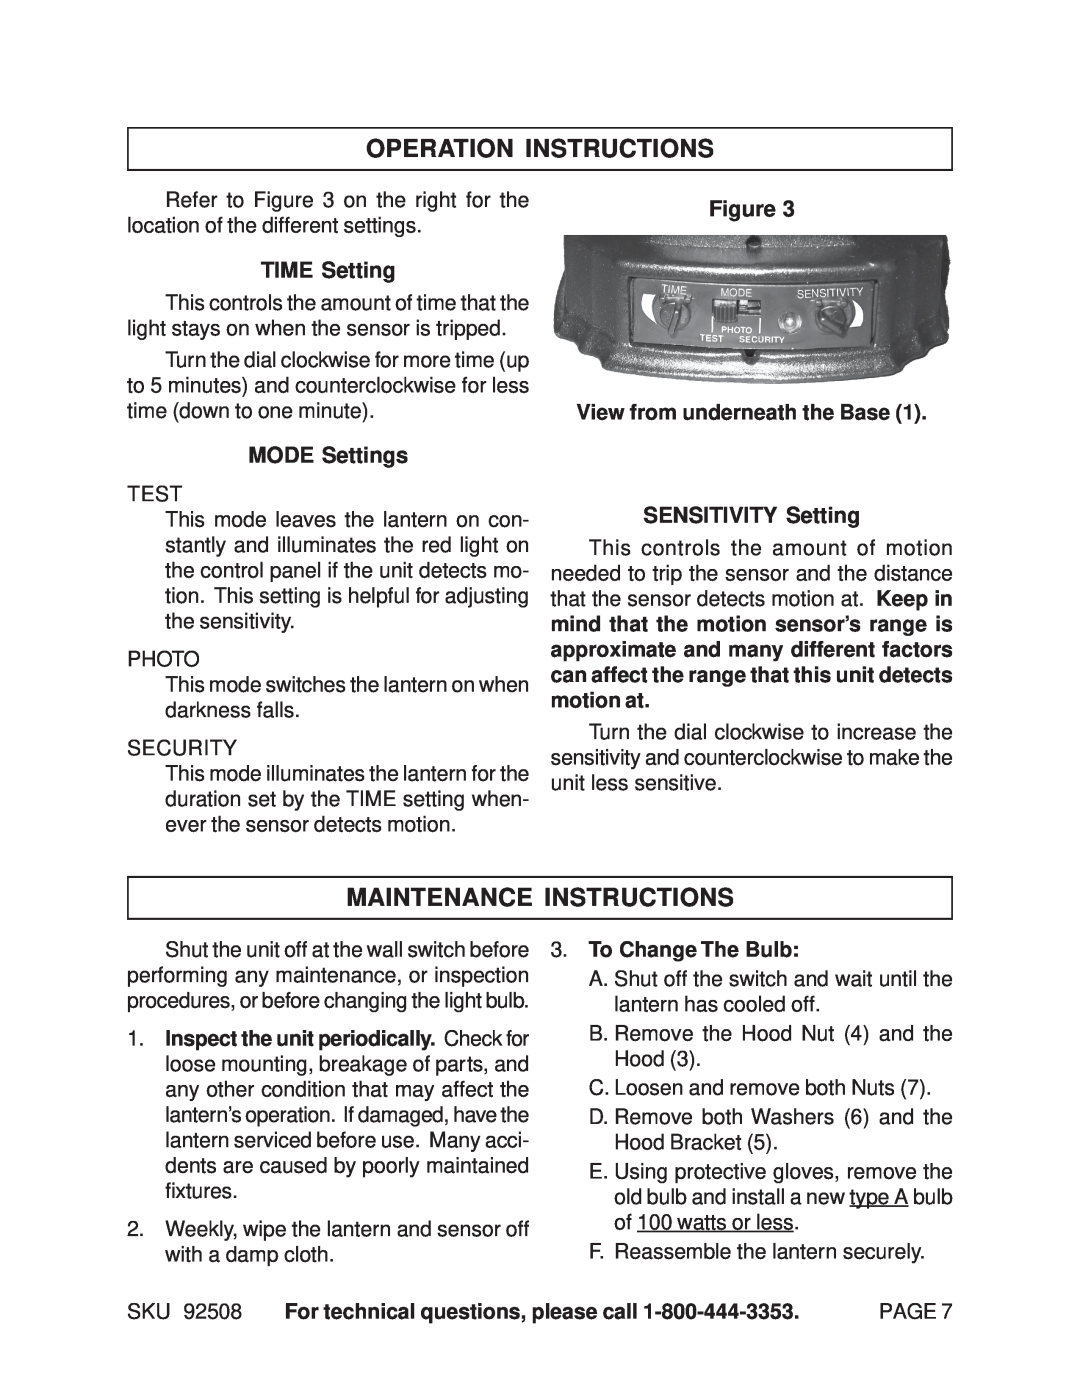 Harbor Freight Tools 92508 manual Operation Instructions, Maintenance Instructions, TIME Setting, MODE Settings 